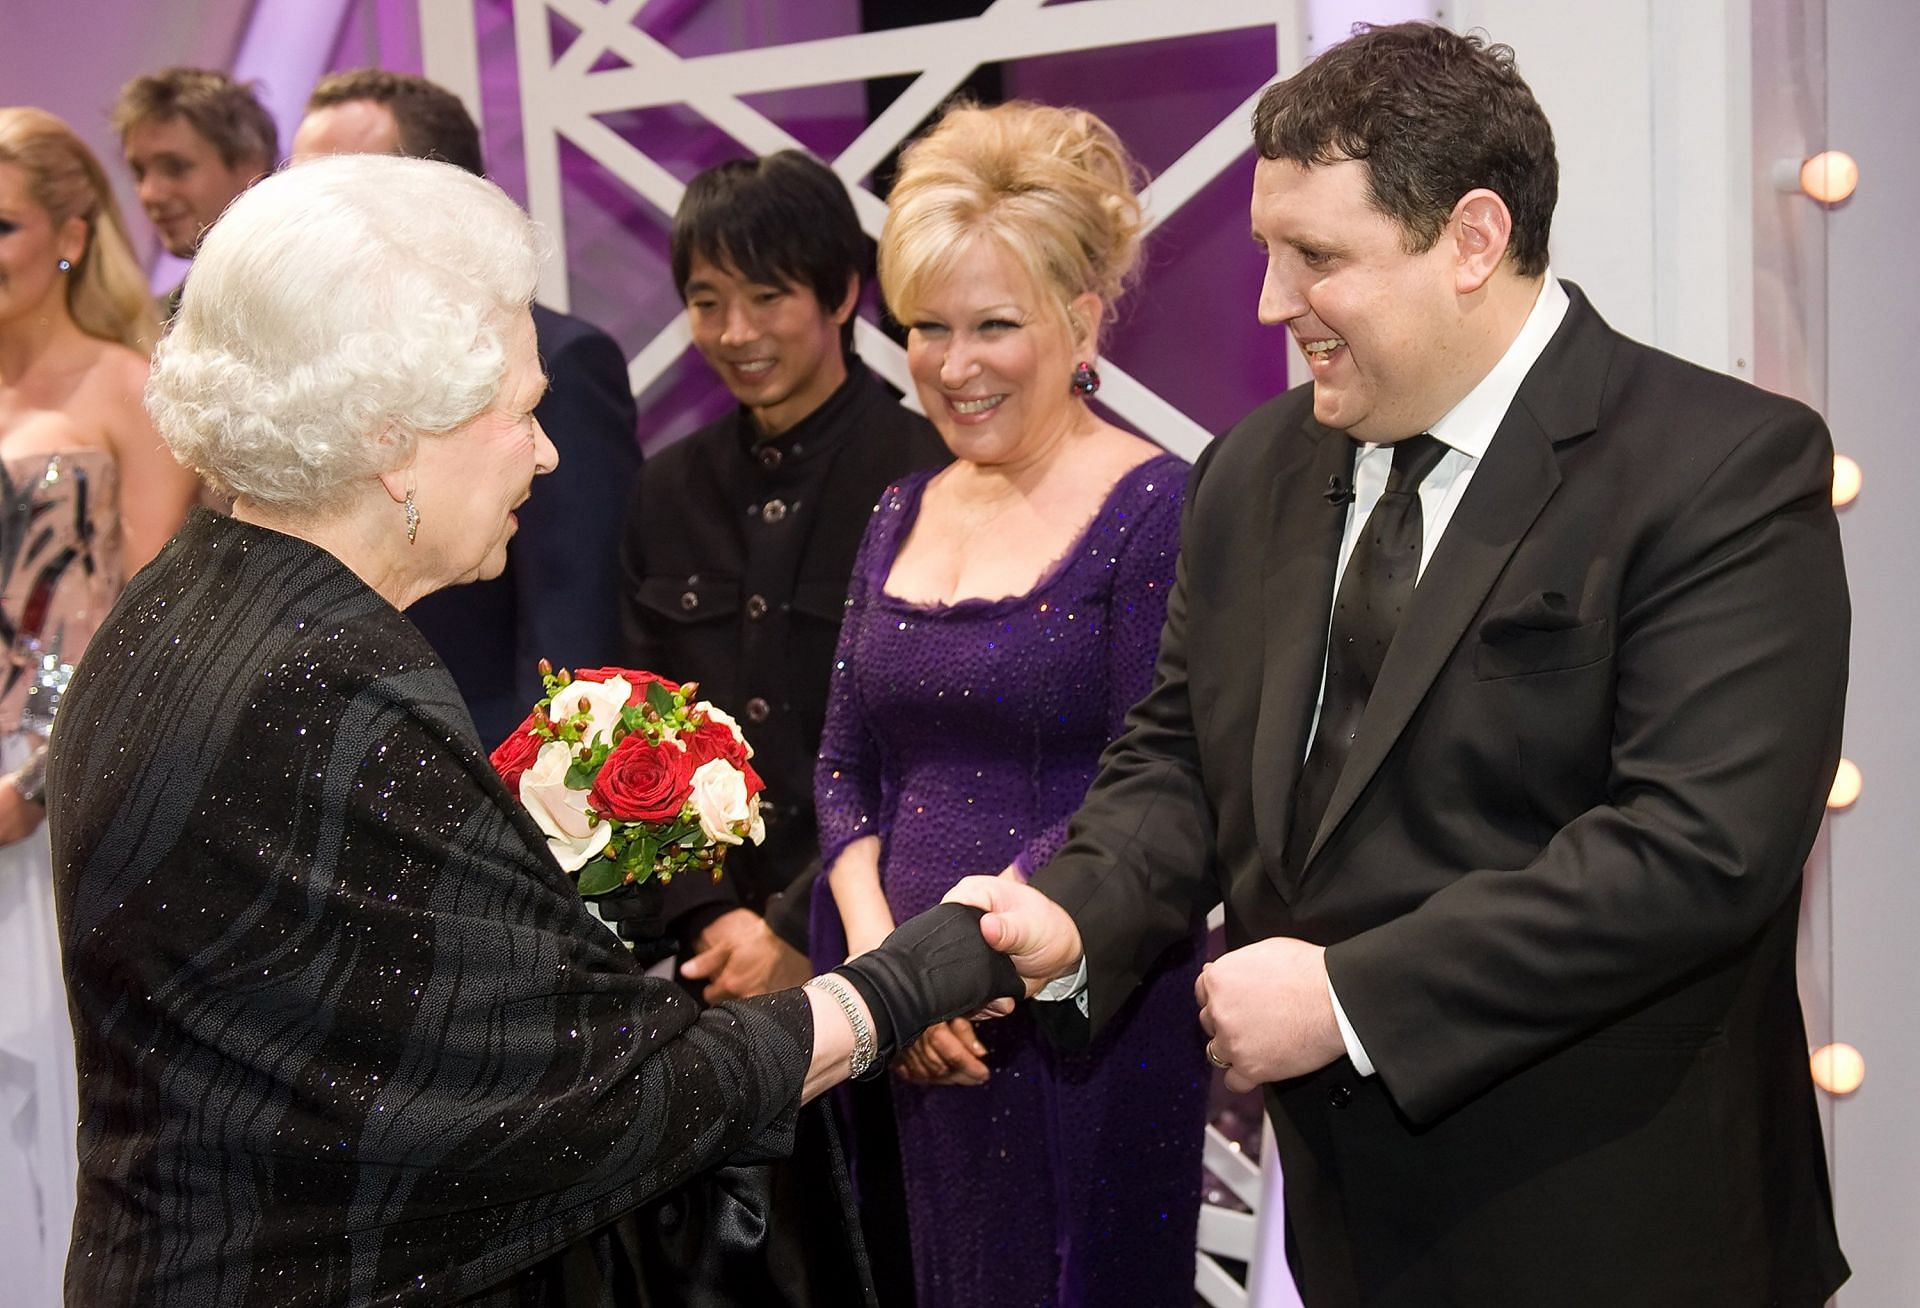 Queen Elizabeth meeting Peter Kay at the Royal Variety - 2009 (Image via Getty/eon Neal)